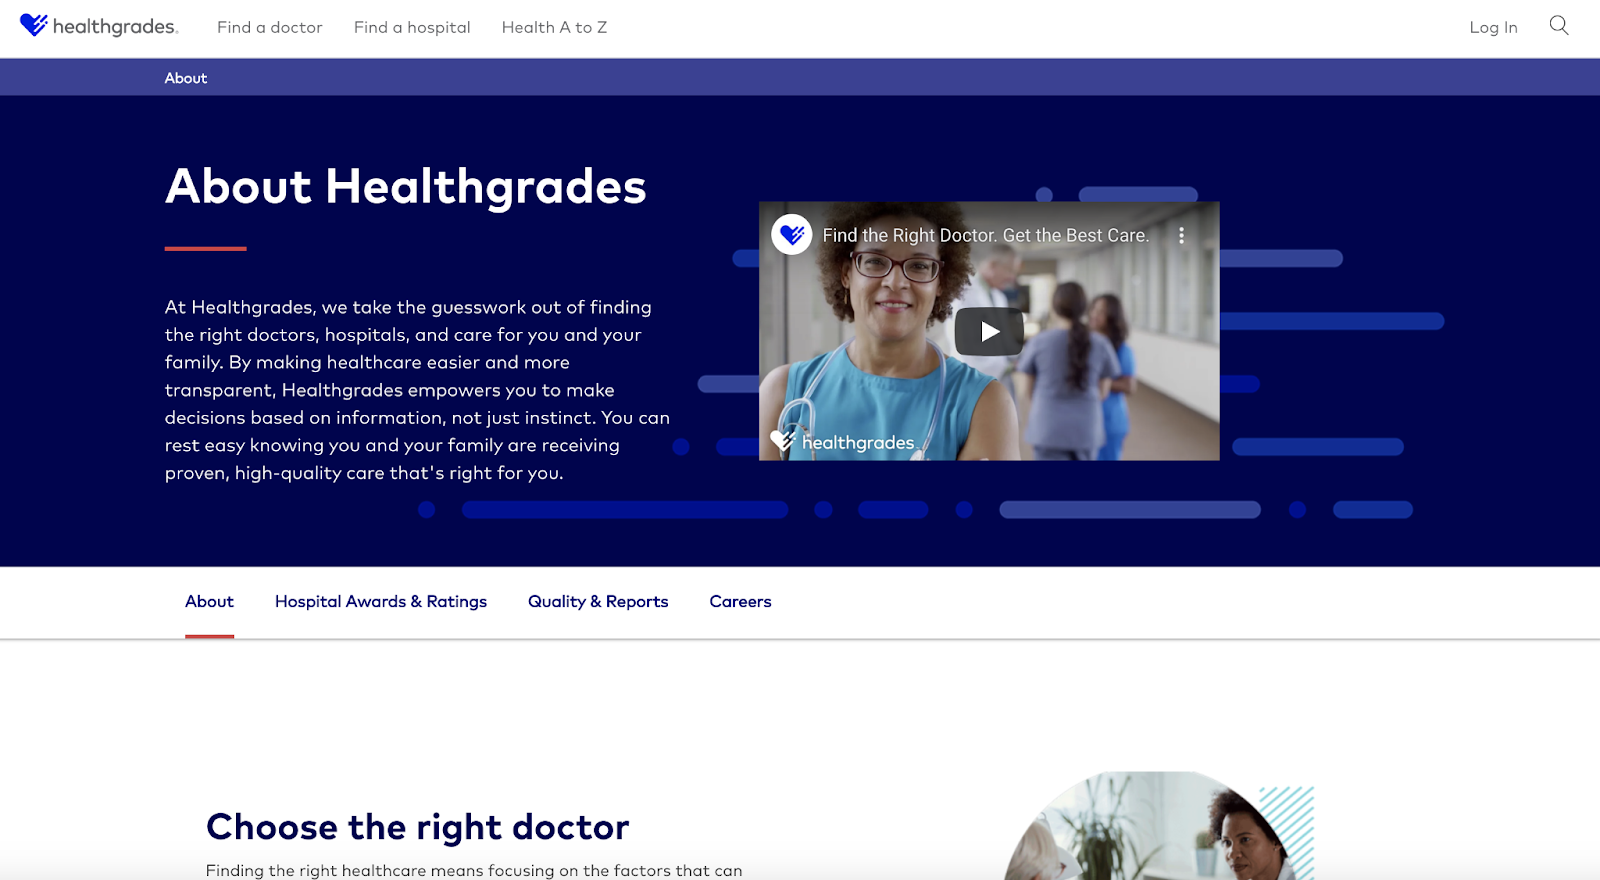 Healthgrades packs its About Us page with plentiful content.